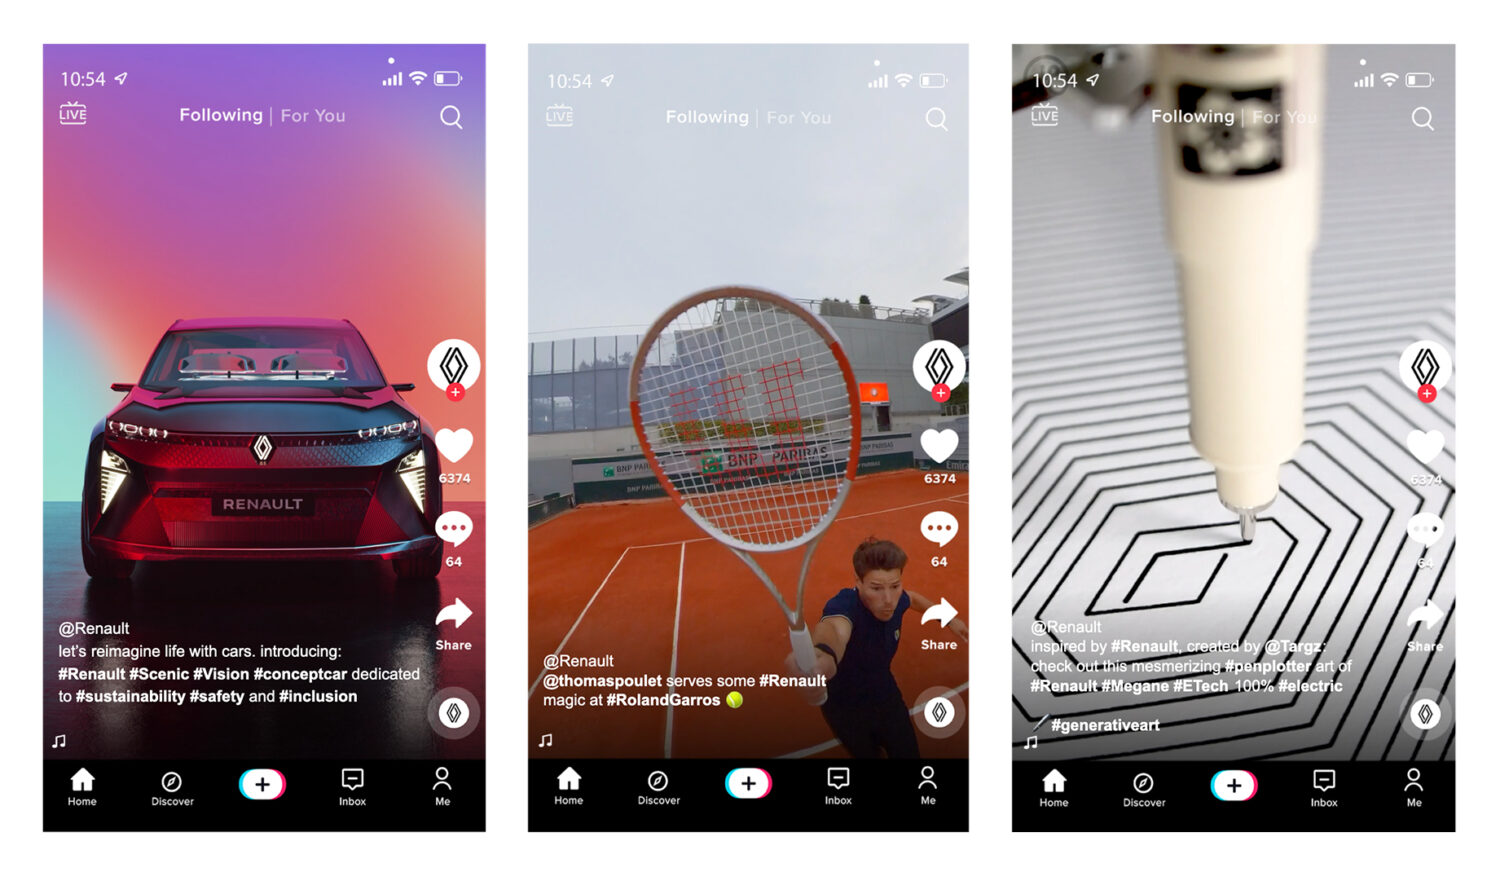 2-2022 - Renault becomes the first french car manufacturer on TikTok